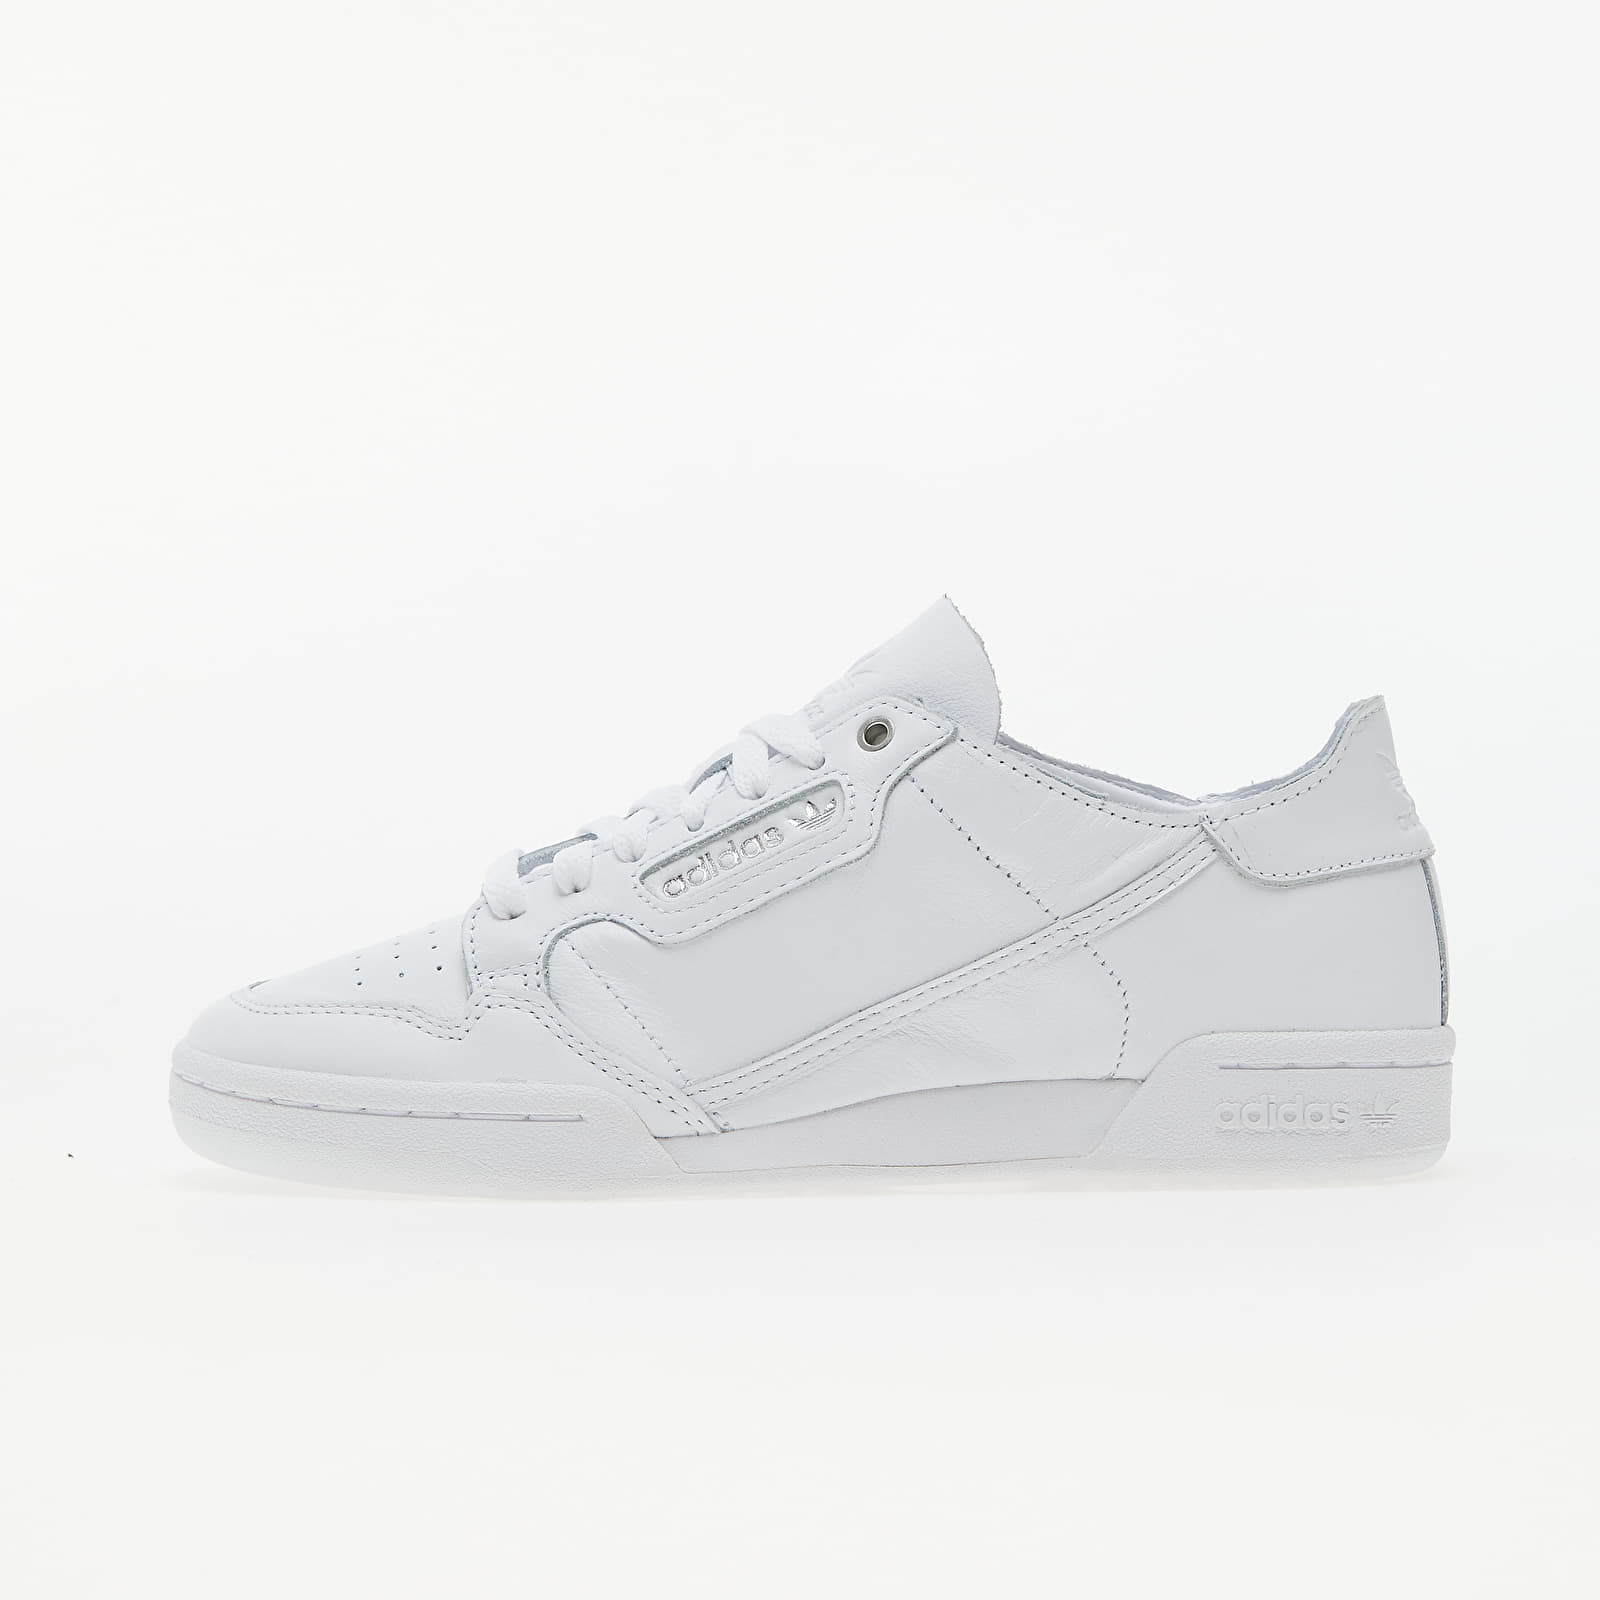 Dámske topánky a tenisky adidas Continental 80 Recon Ftw White/ Ftw White/ Silver Metalic